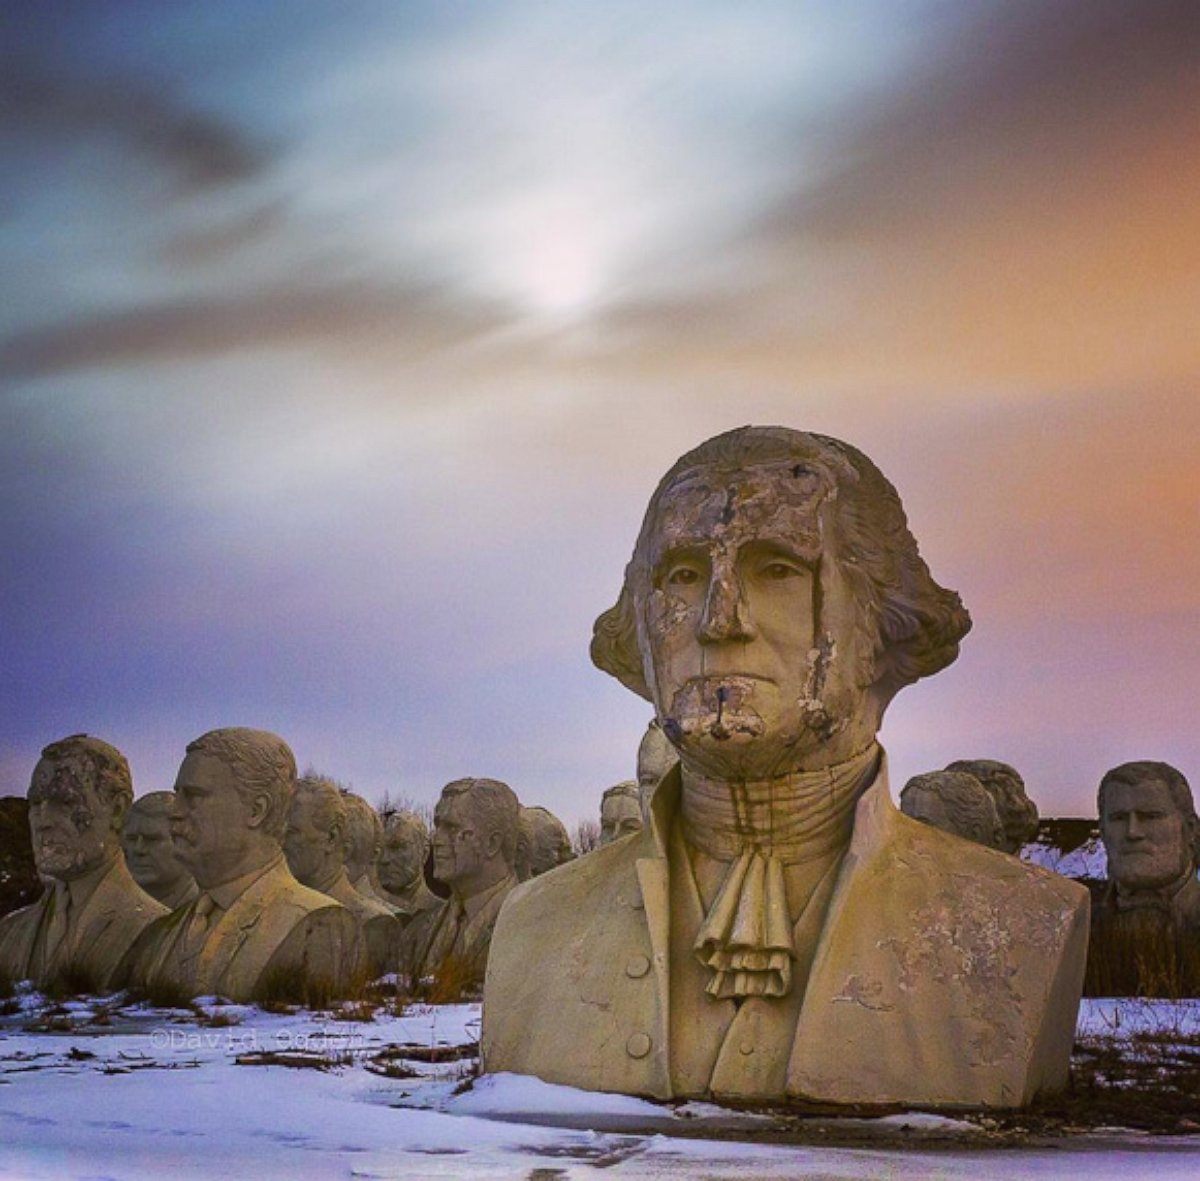 PHOTO: Stone busts of former U.S. Presidents sit in a field near Williamsburg, Virginia. The 20-foot-tall heads were saved from a nearby presidential museum when it closed in 2010.